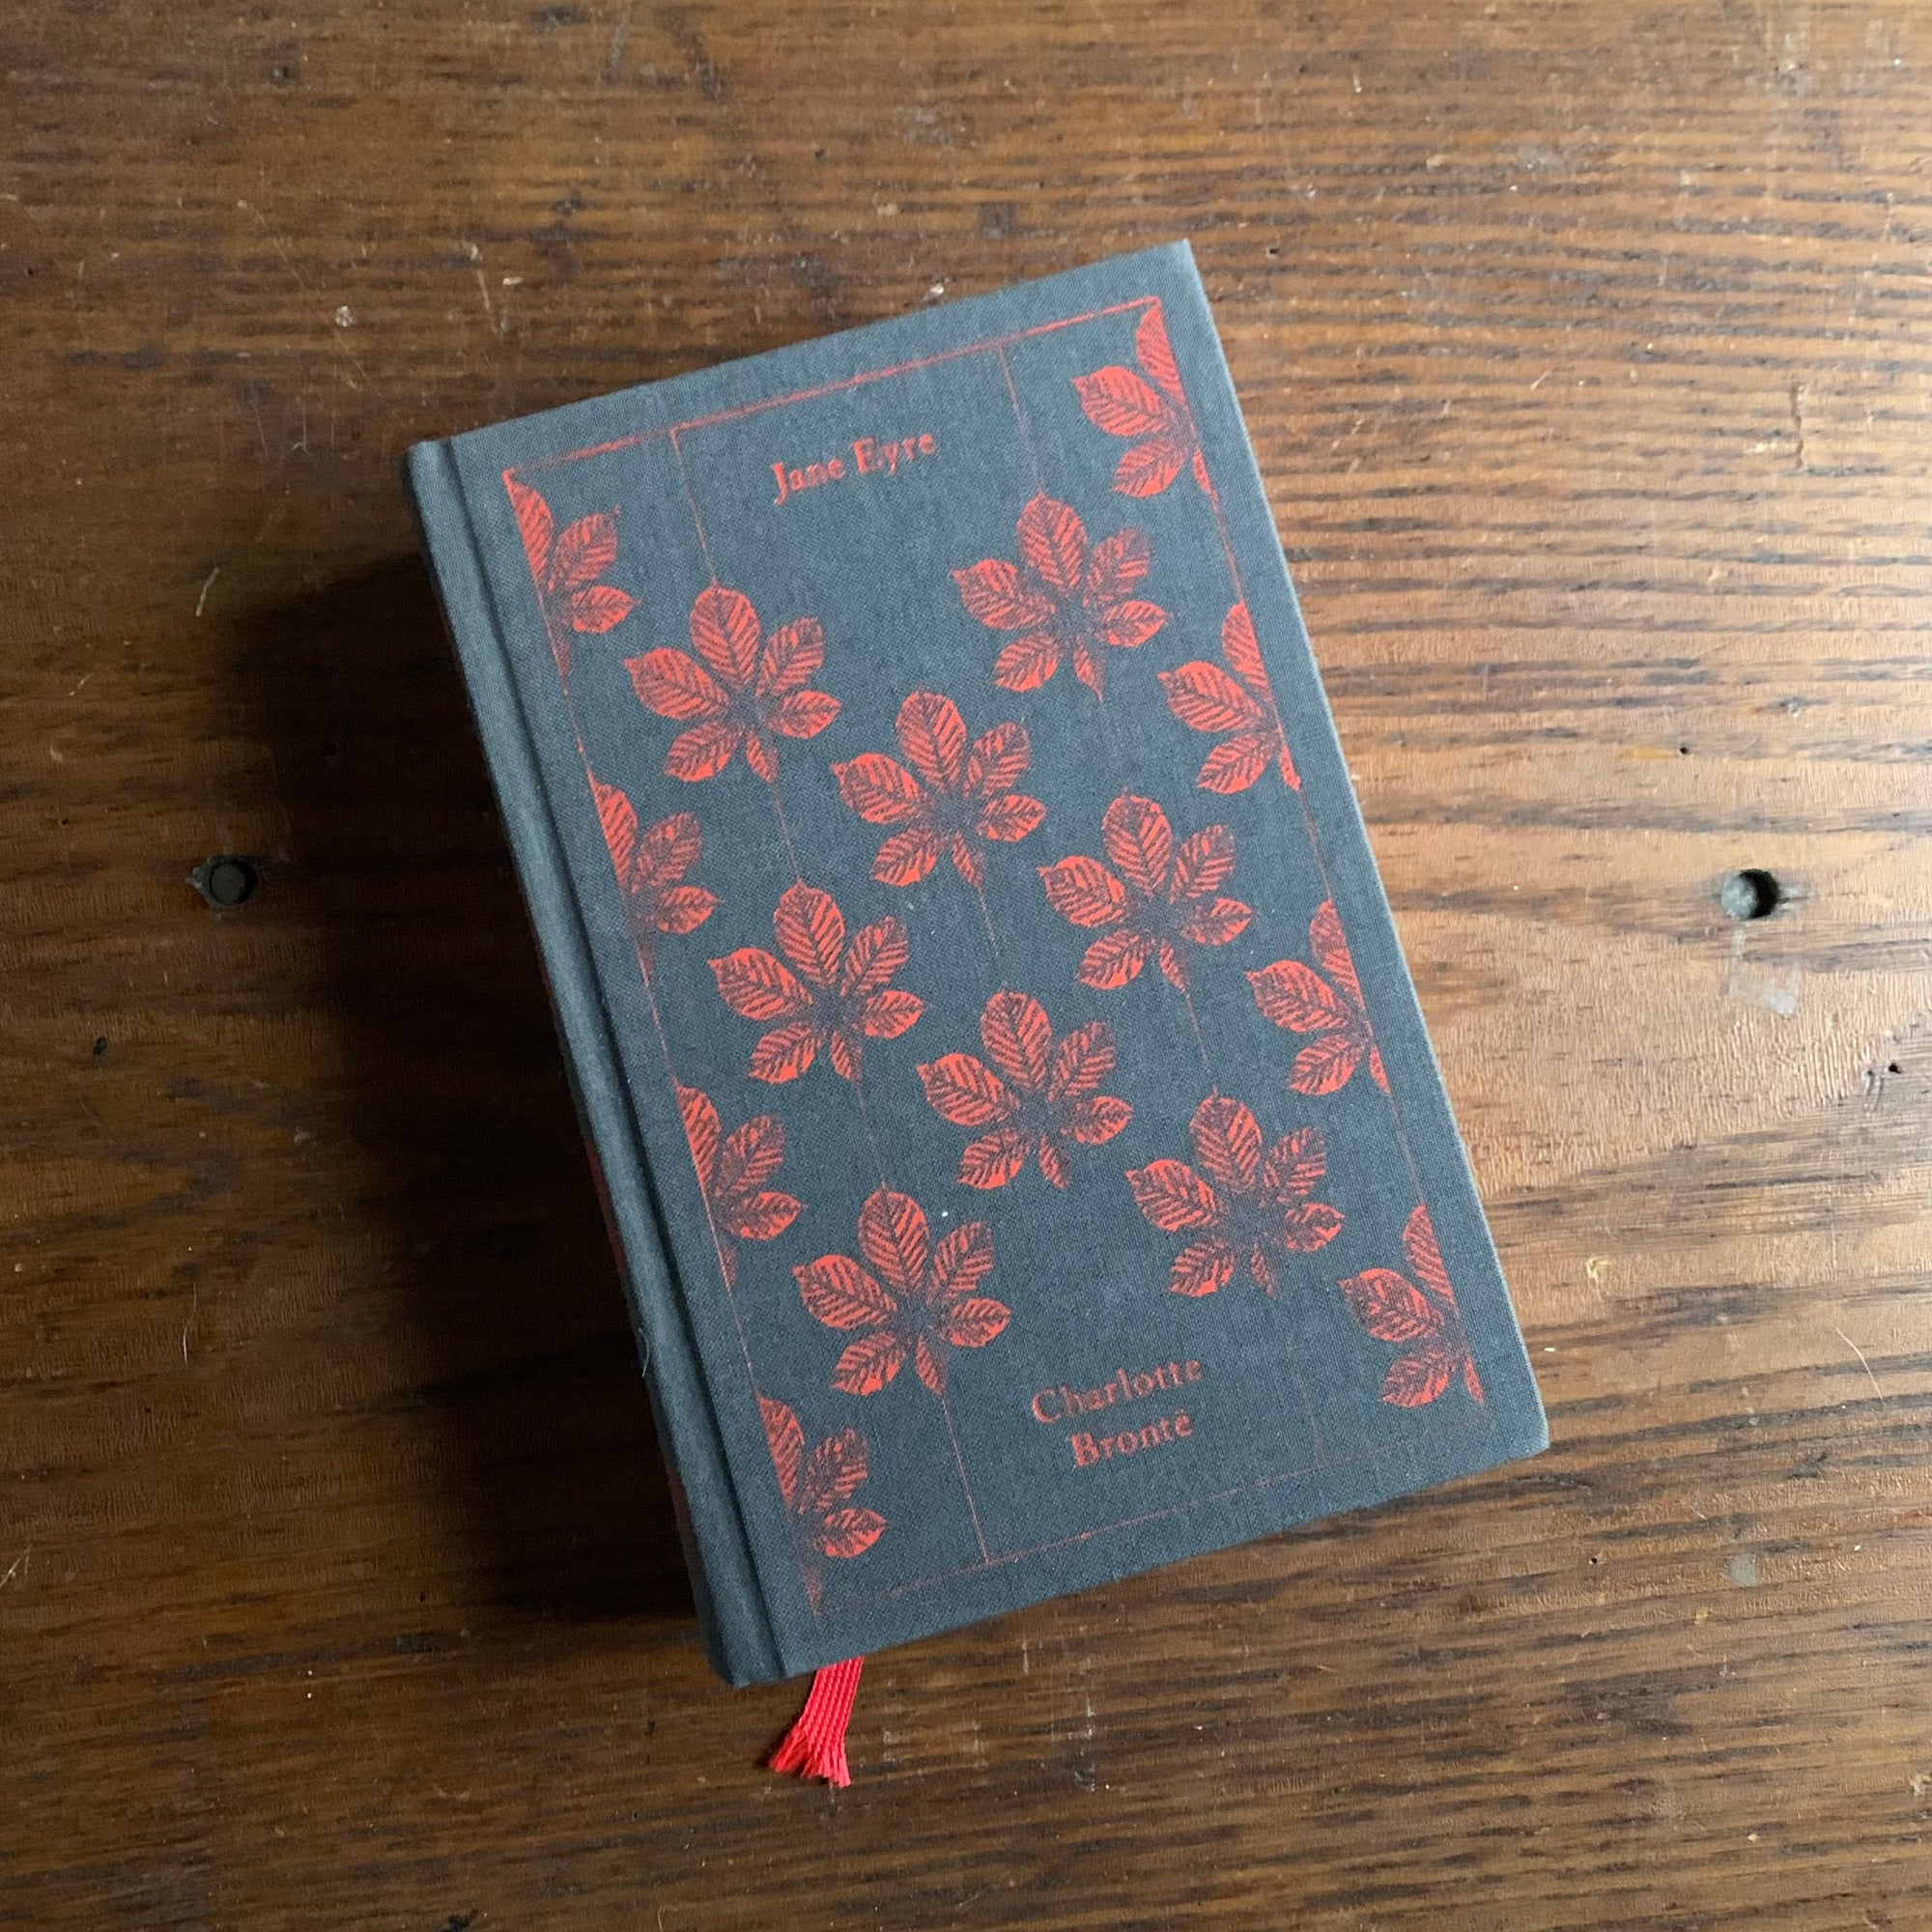 Jane Eyre by Charlotte Bronte - a 2007 Penguin Classics Edition